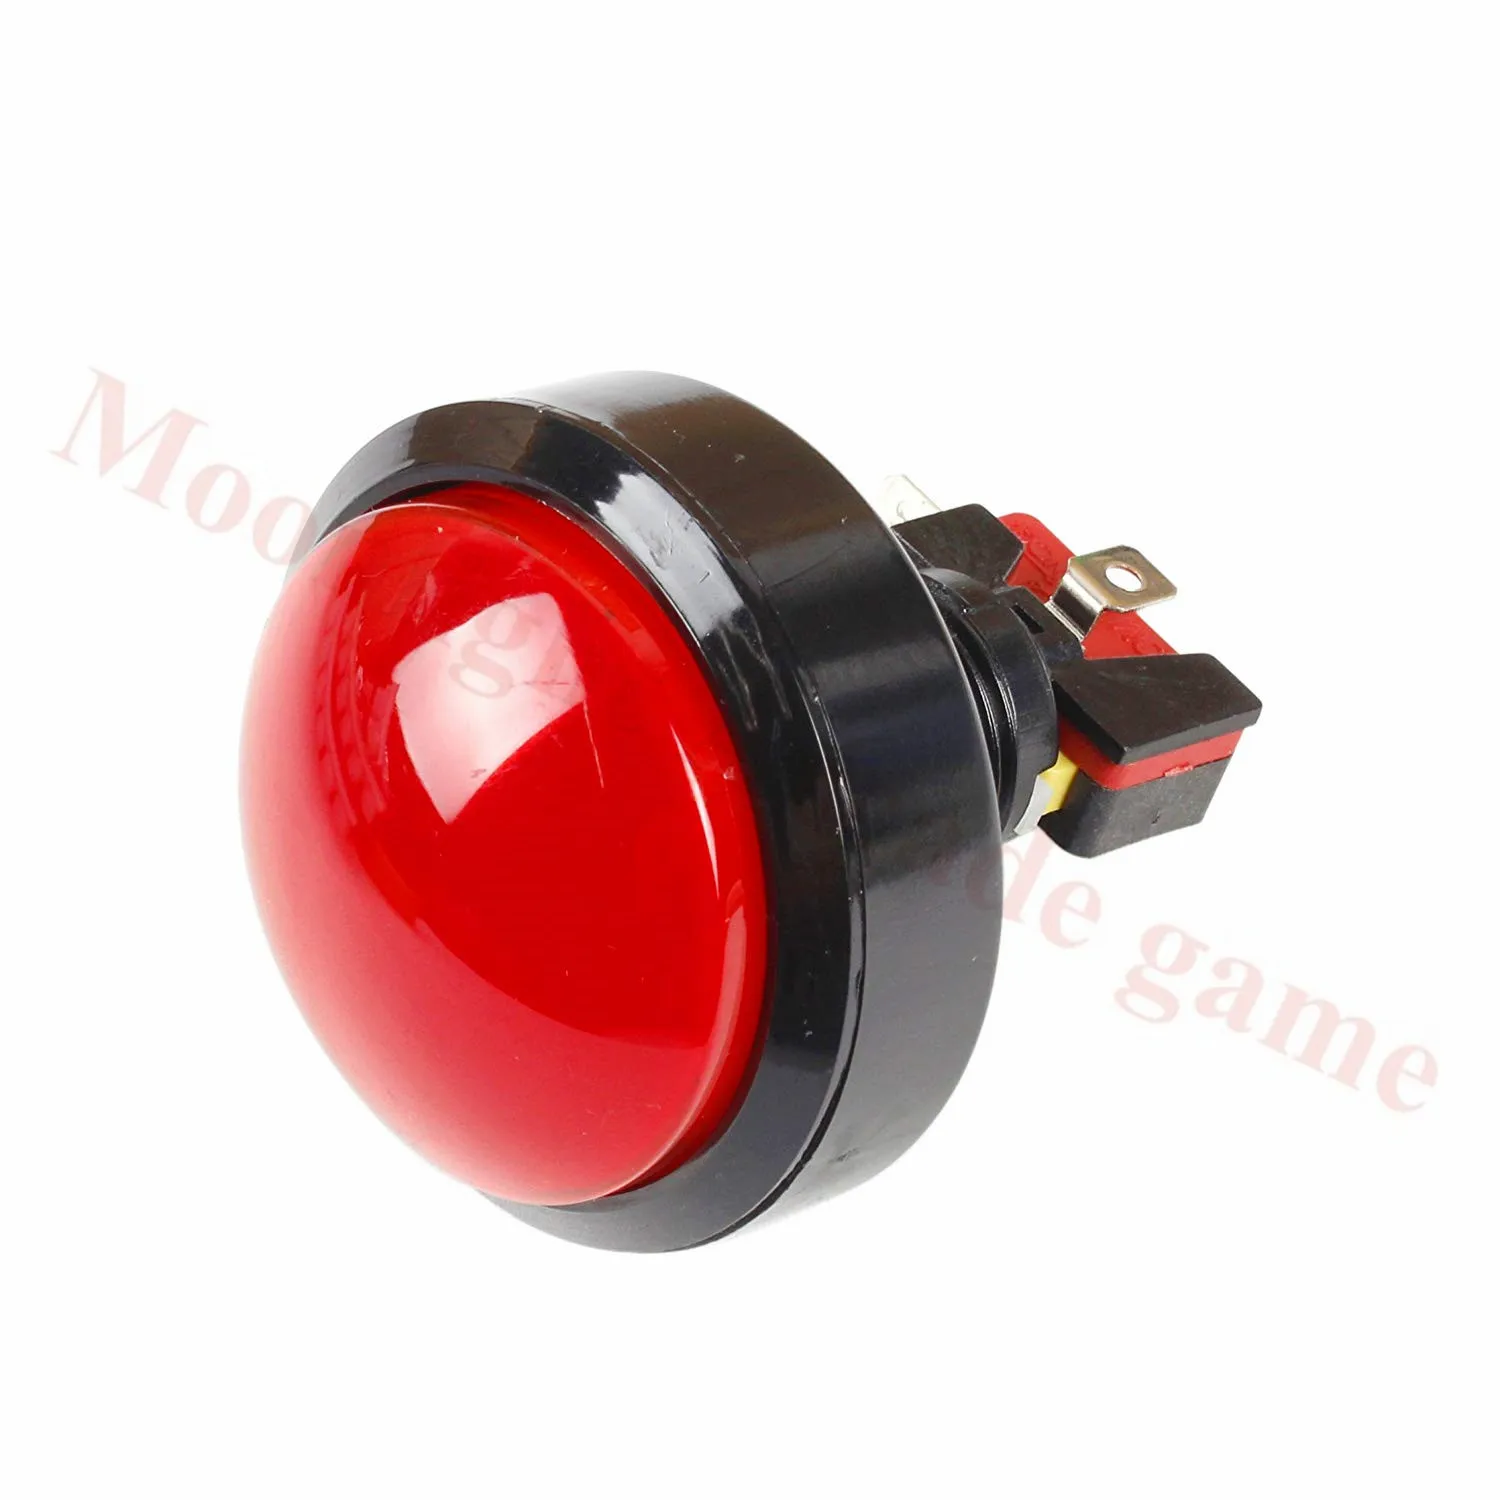 

5PCS/Lot 60mm Round dome Momentary Push Button switch 12V Self-reset LED Illuminated with Microswitch for Arcade Game Machine